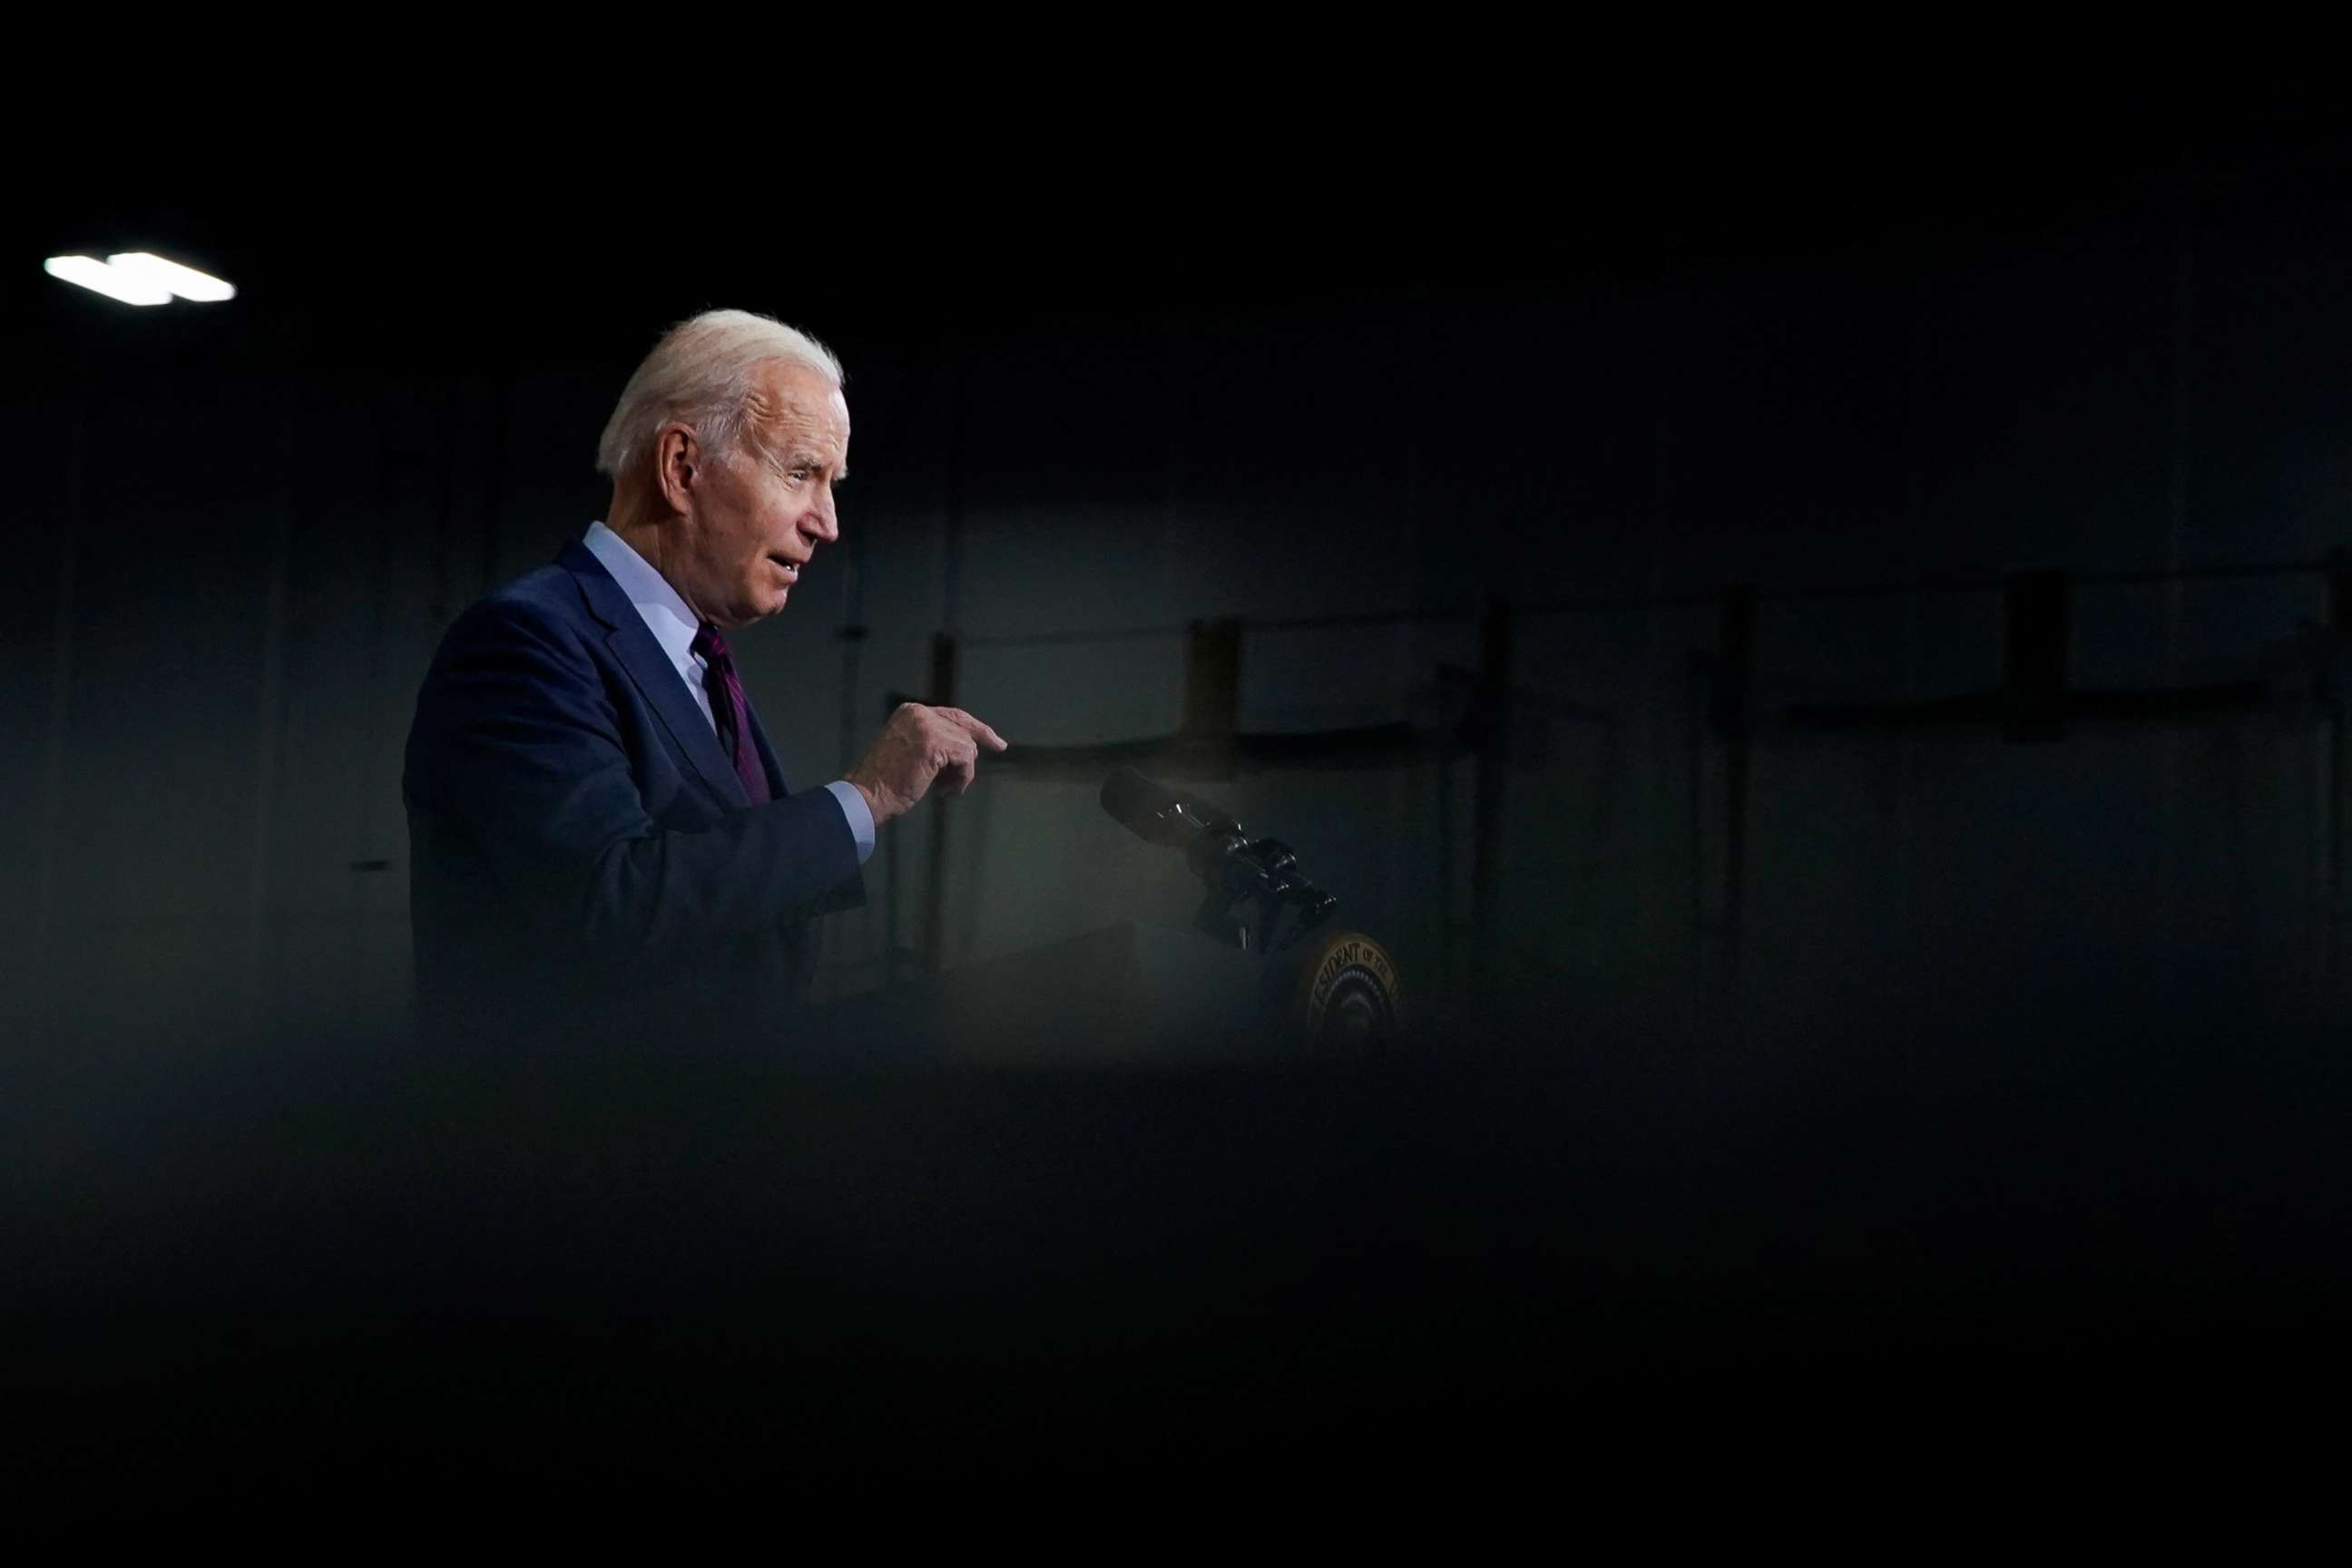 PHOTO: President Joe Biden delivers remarks during a visit at United Performance Metals in Hamilton, Ohio, May 6, 2022.